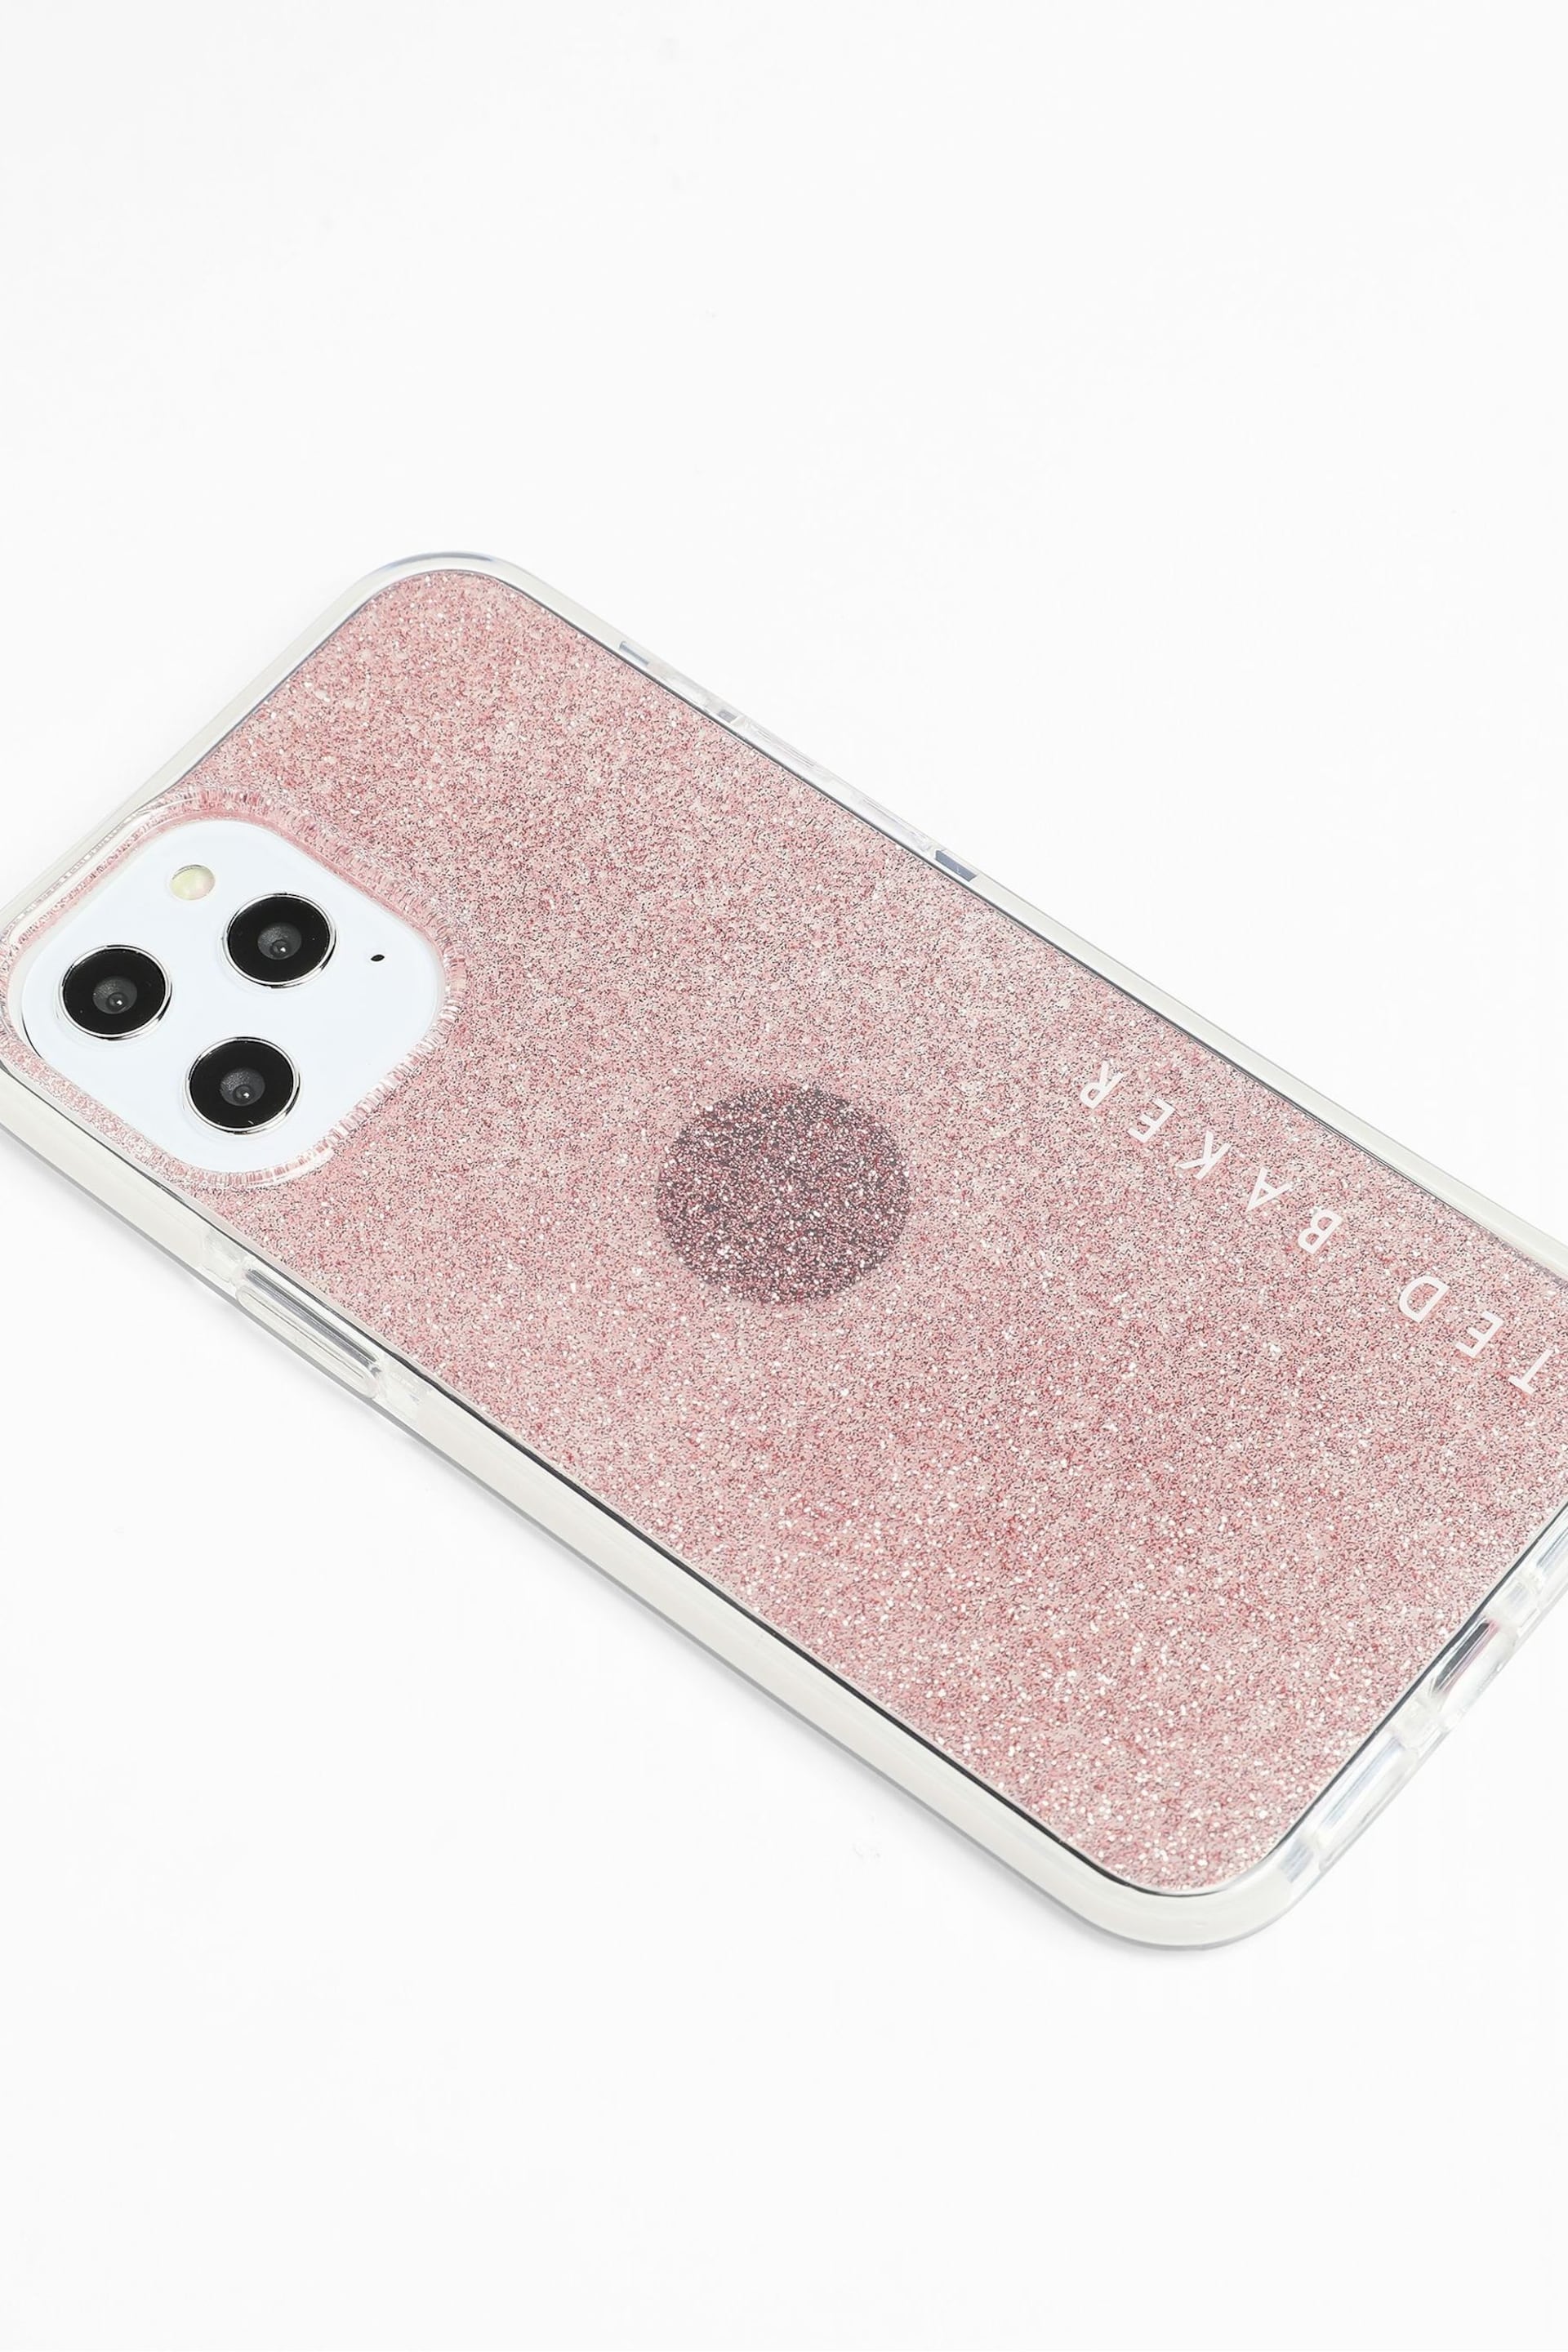 Ted Baker Pink Phone Cases - Image 3 of 4